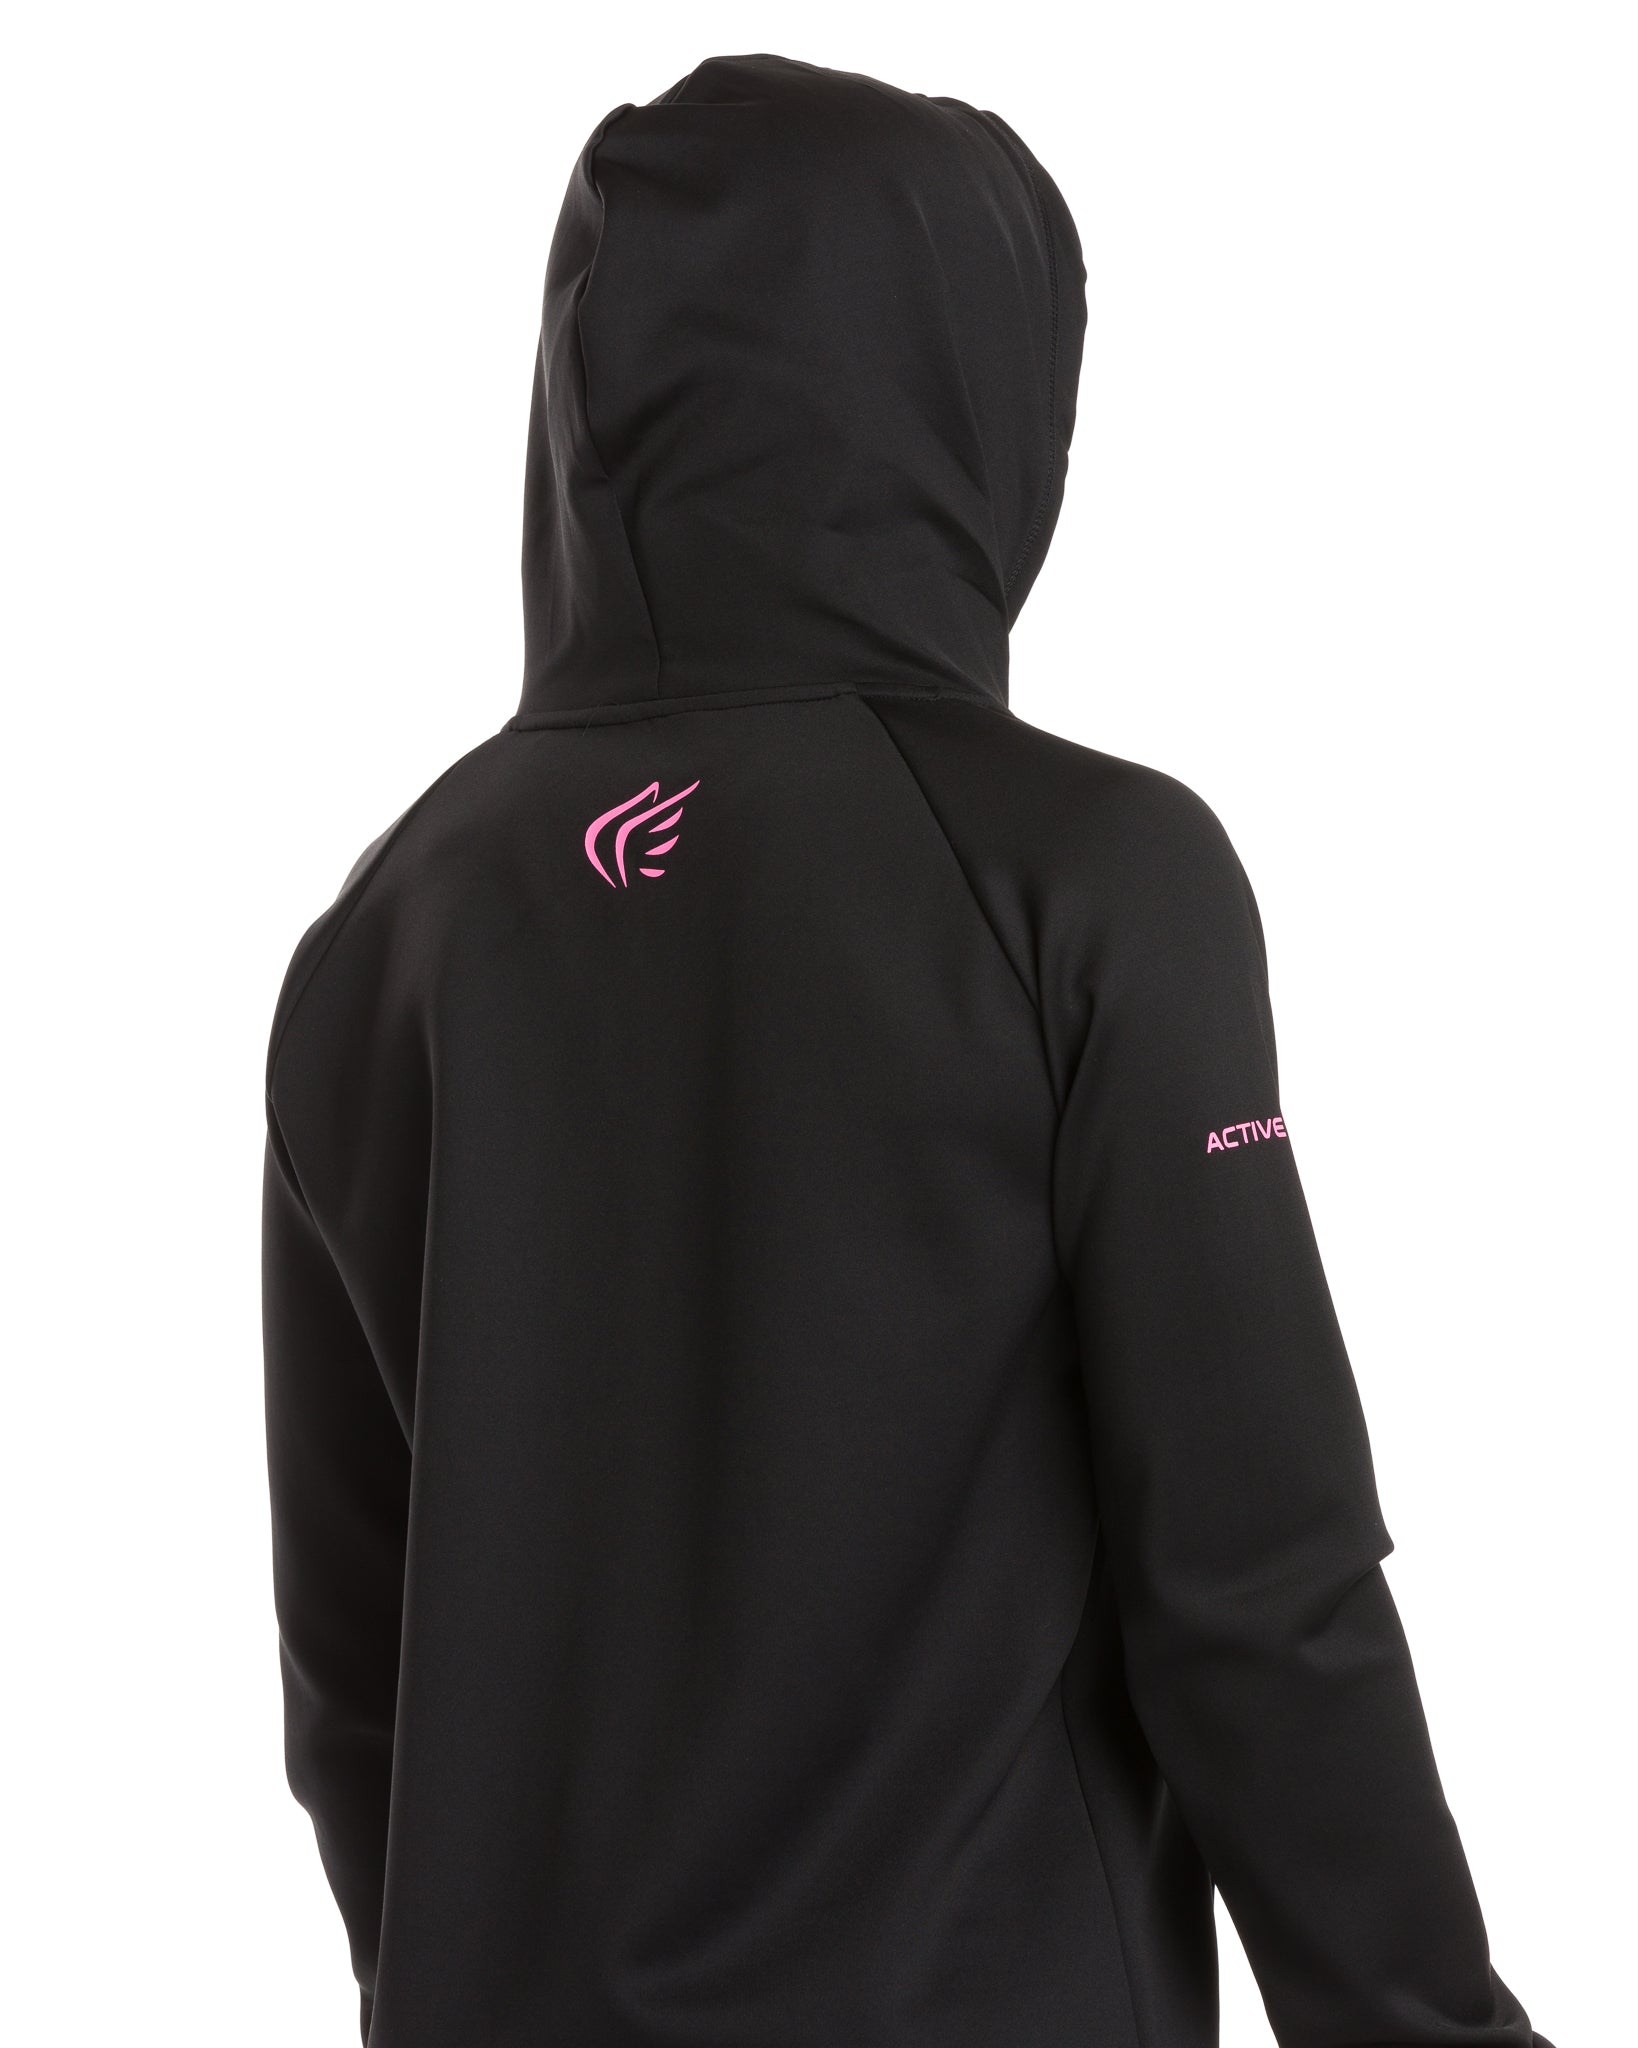 Hoodie and Sweatshirt for Women | Active Faith Sports